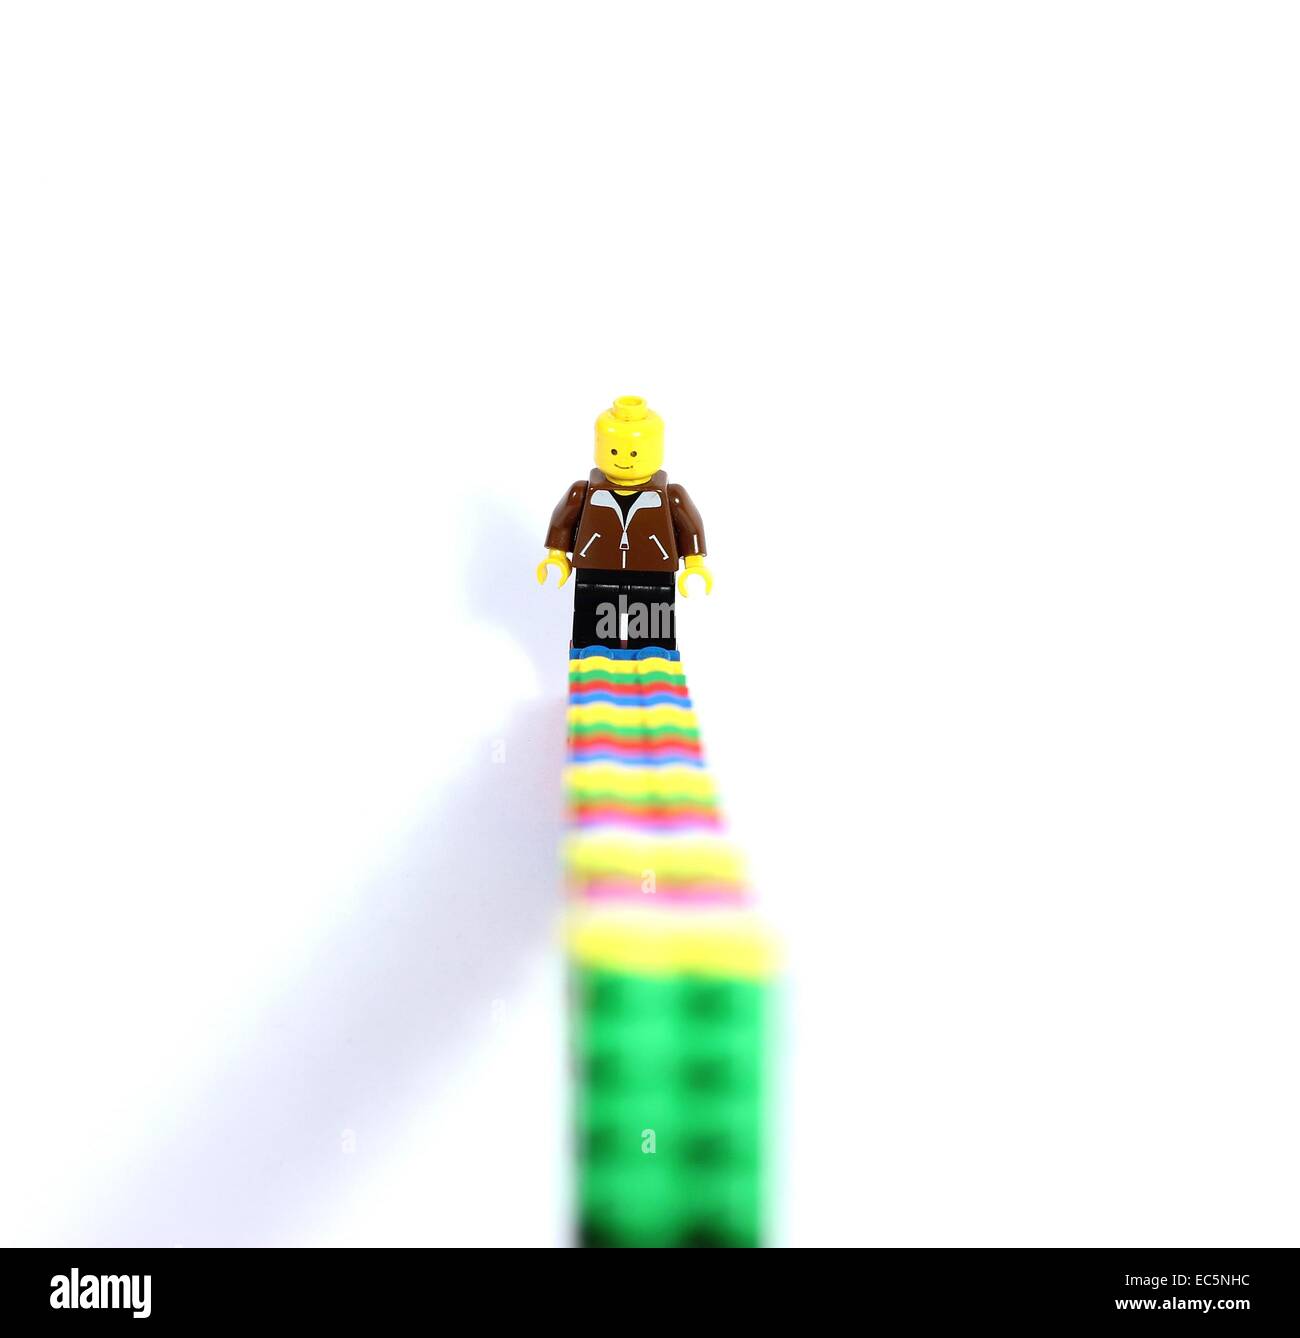 Lego figure and lego stairs. Rising. Smiling at difficulties. Stock Photo